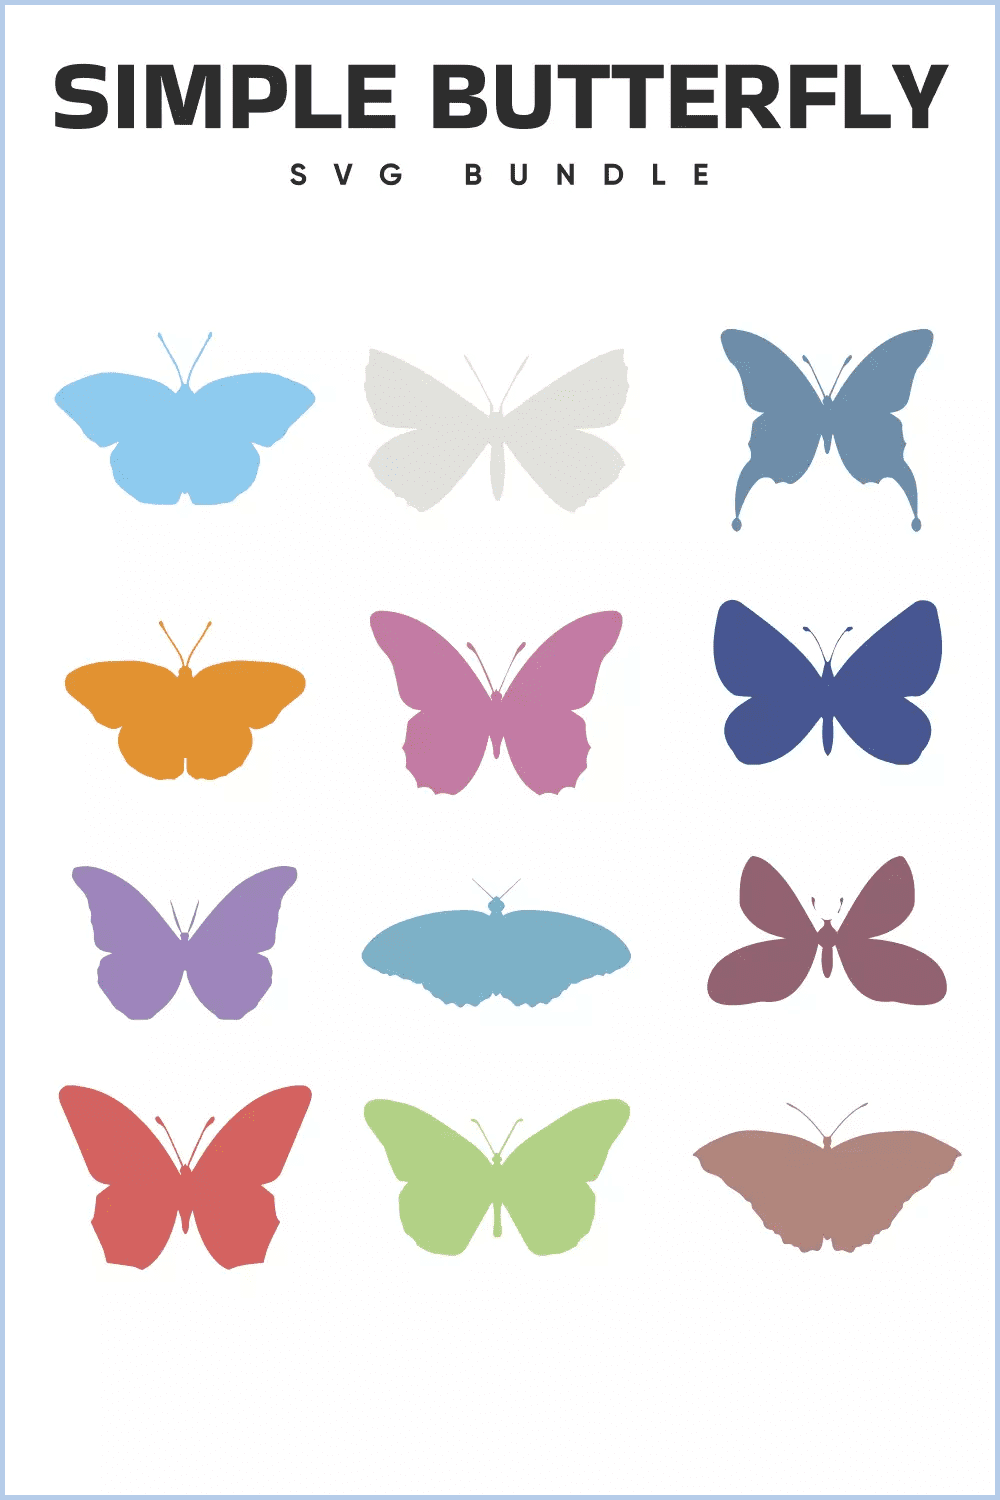 Collage of colored images of butterflies in a minimalist style.